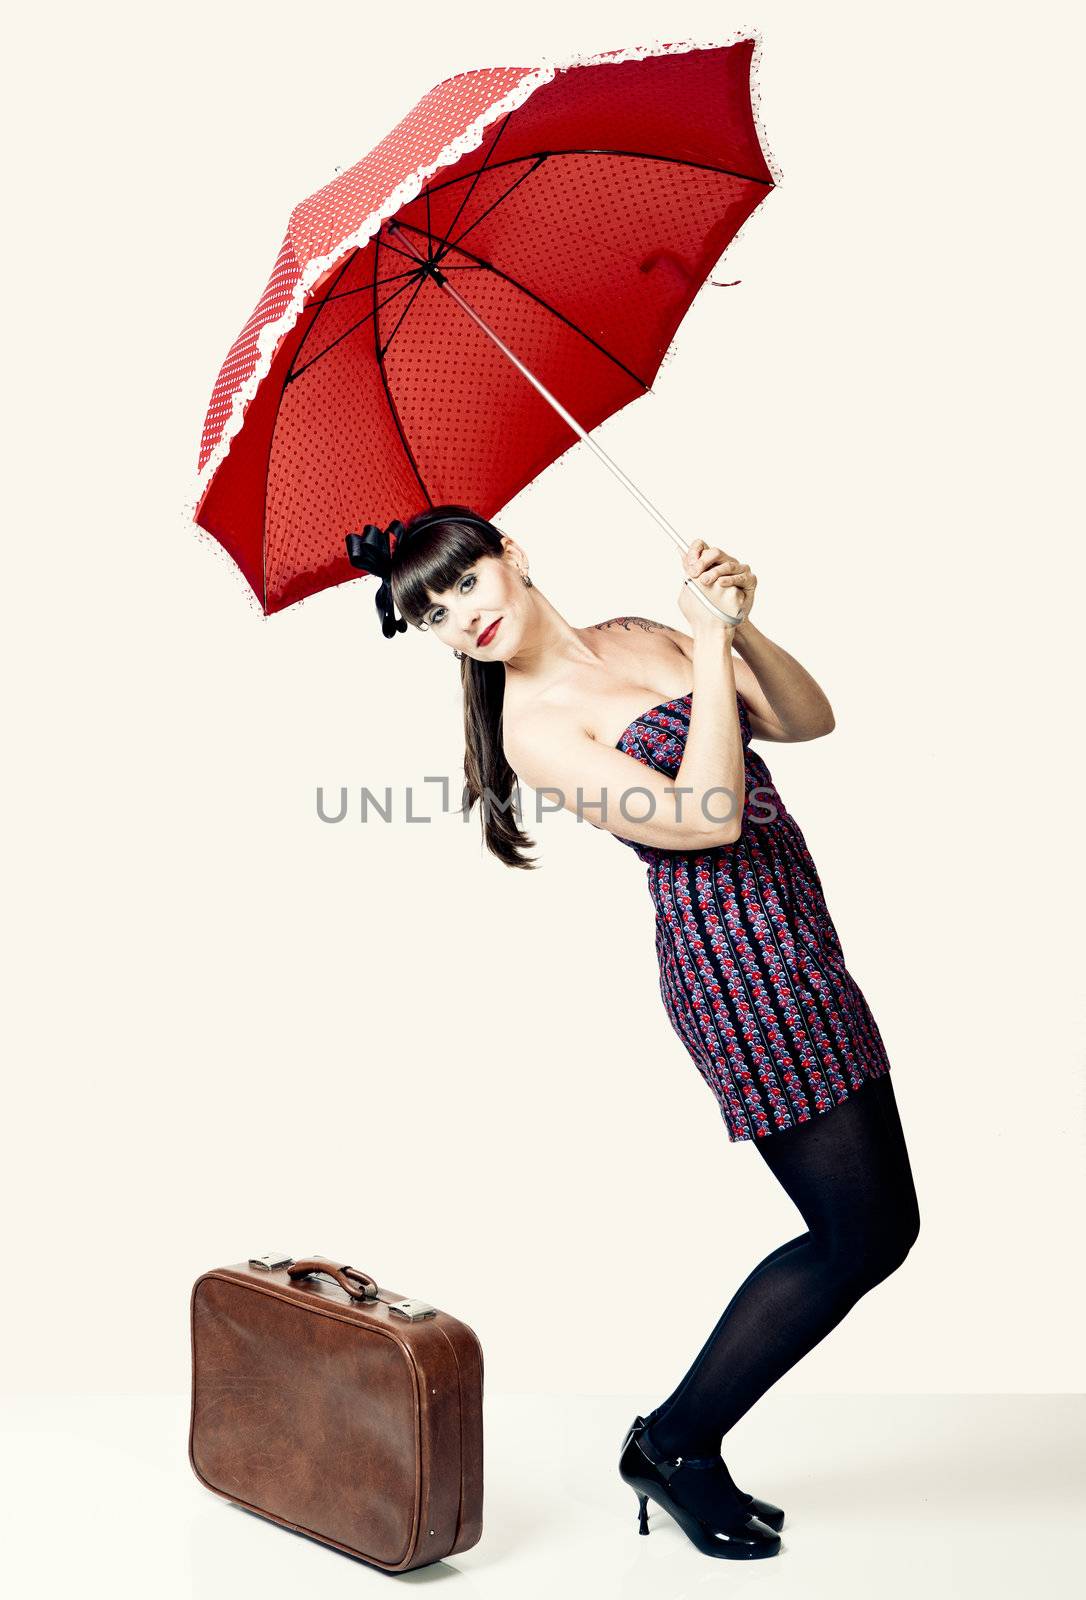 Beautiful woman with a vintage look posing with a red umbrella